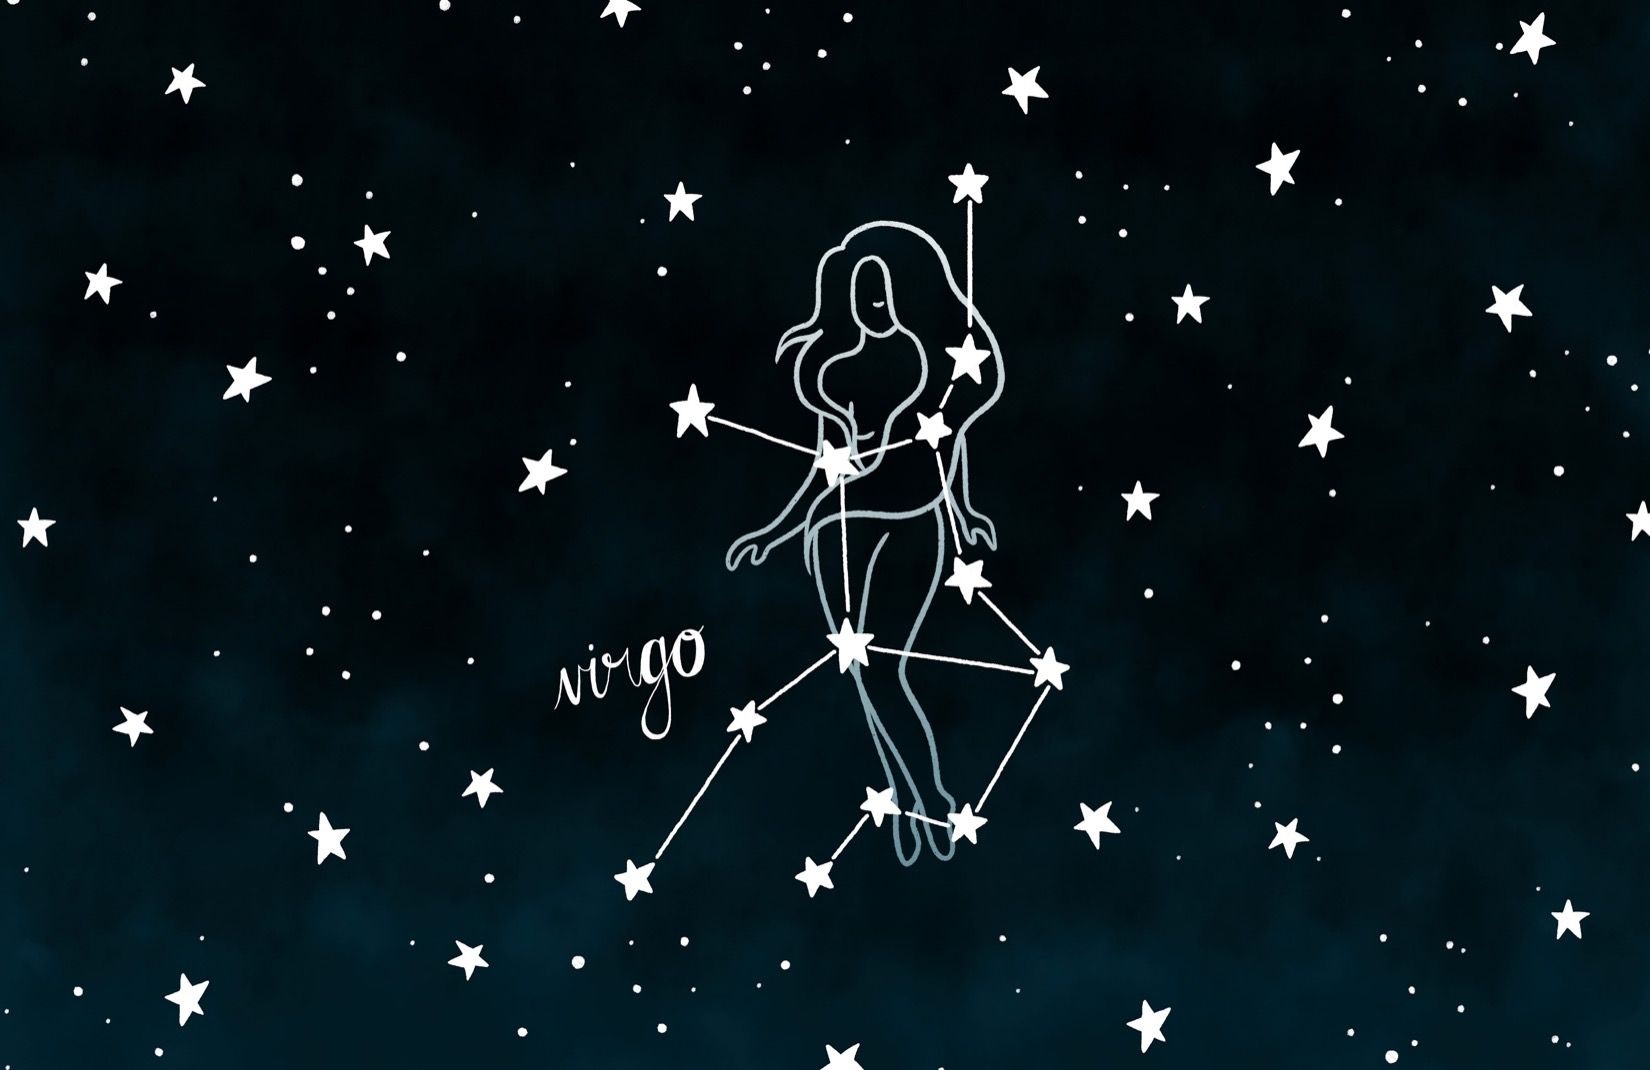 A woman is standing on the stars with her name written in white - Virgo